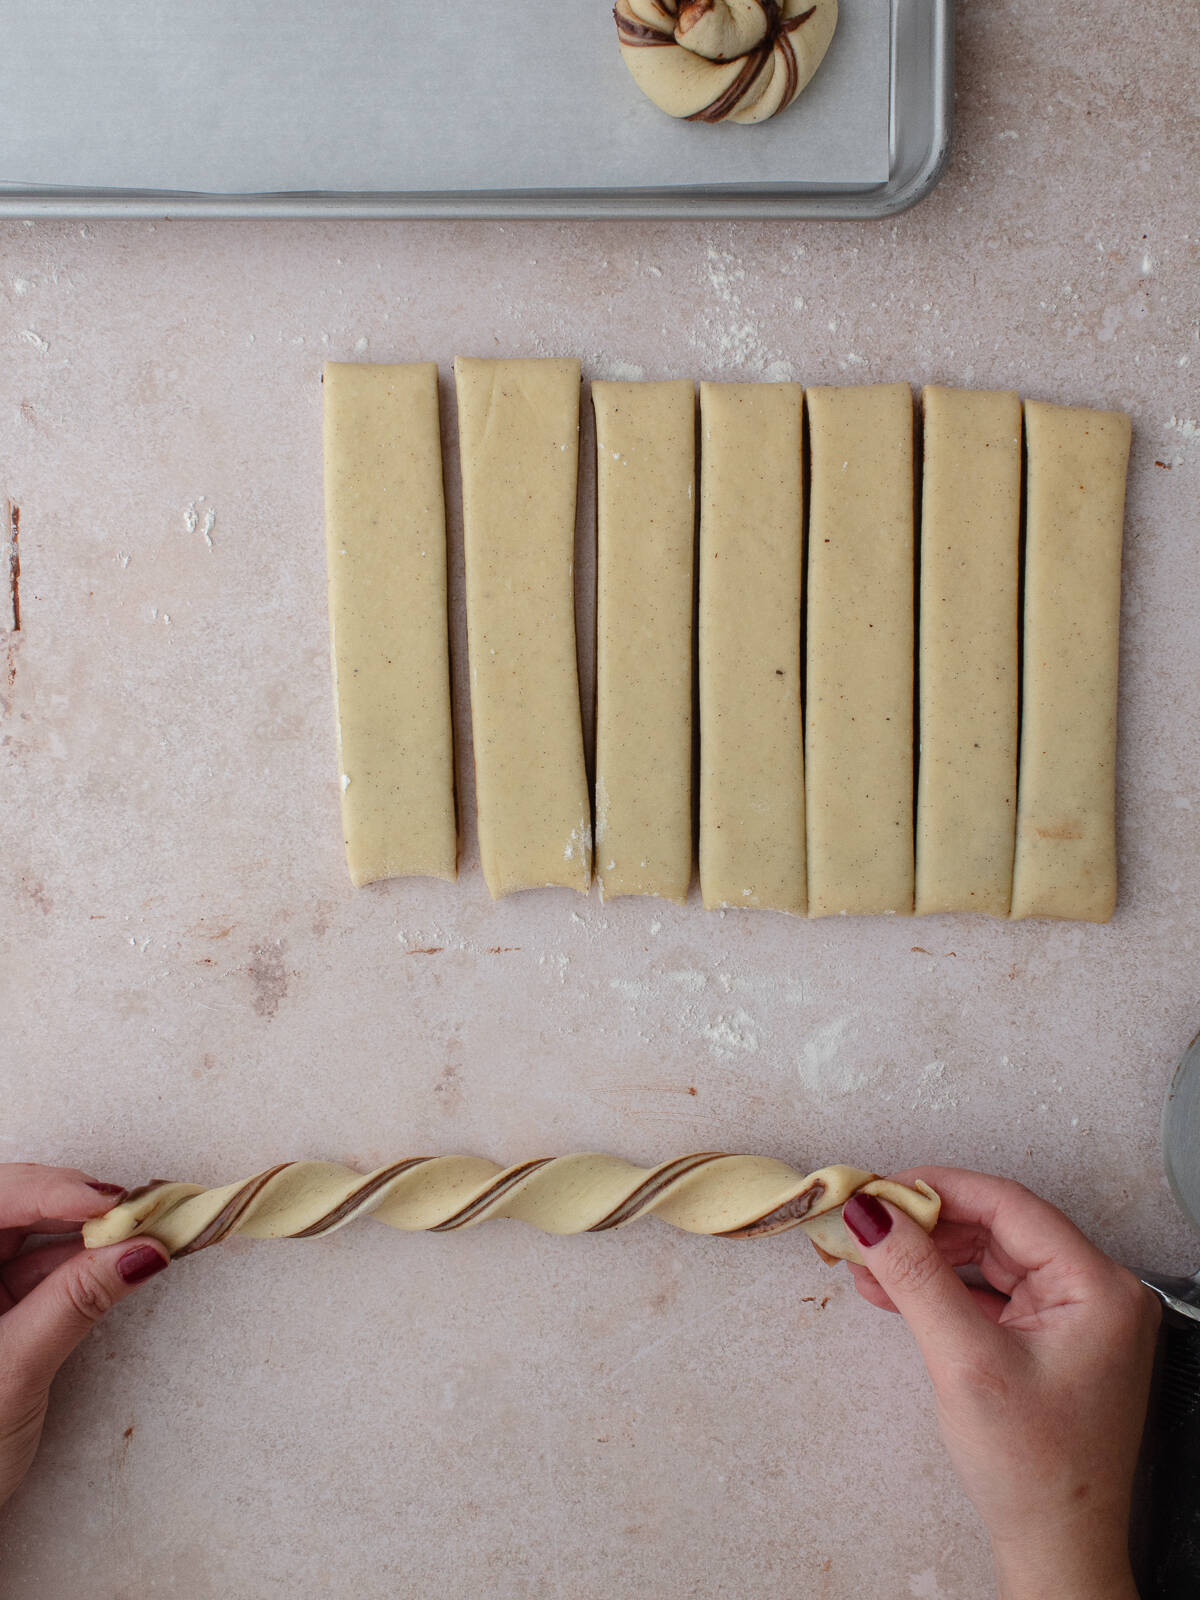 Twisting strips of dough into knots